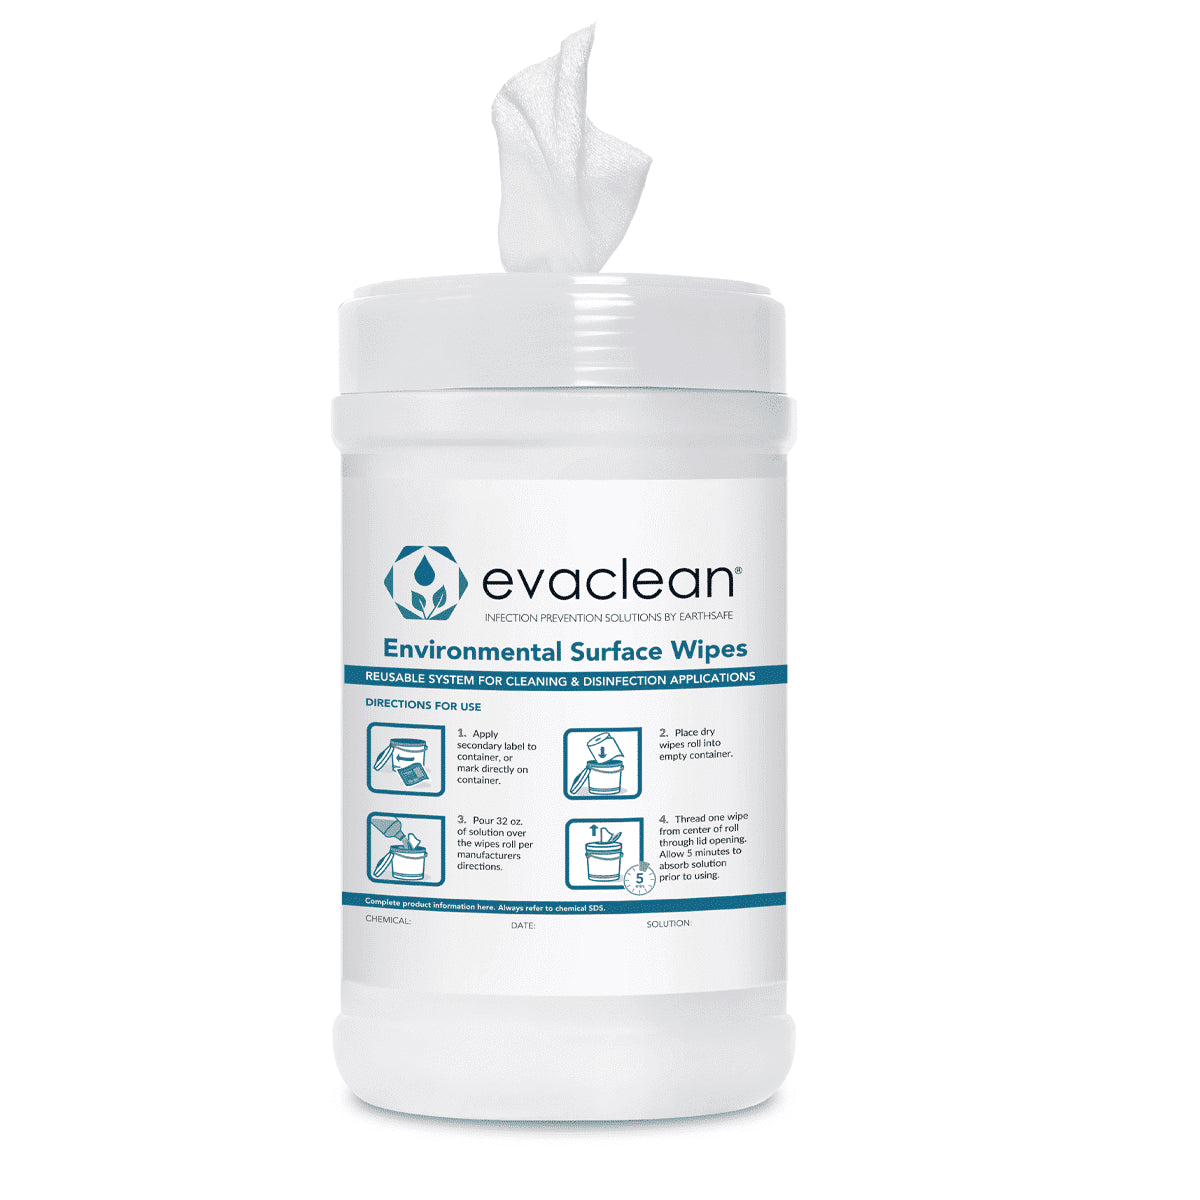 Small Bucket & Lid for EvaClean 160 Wipes